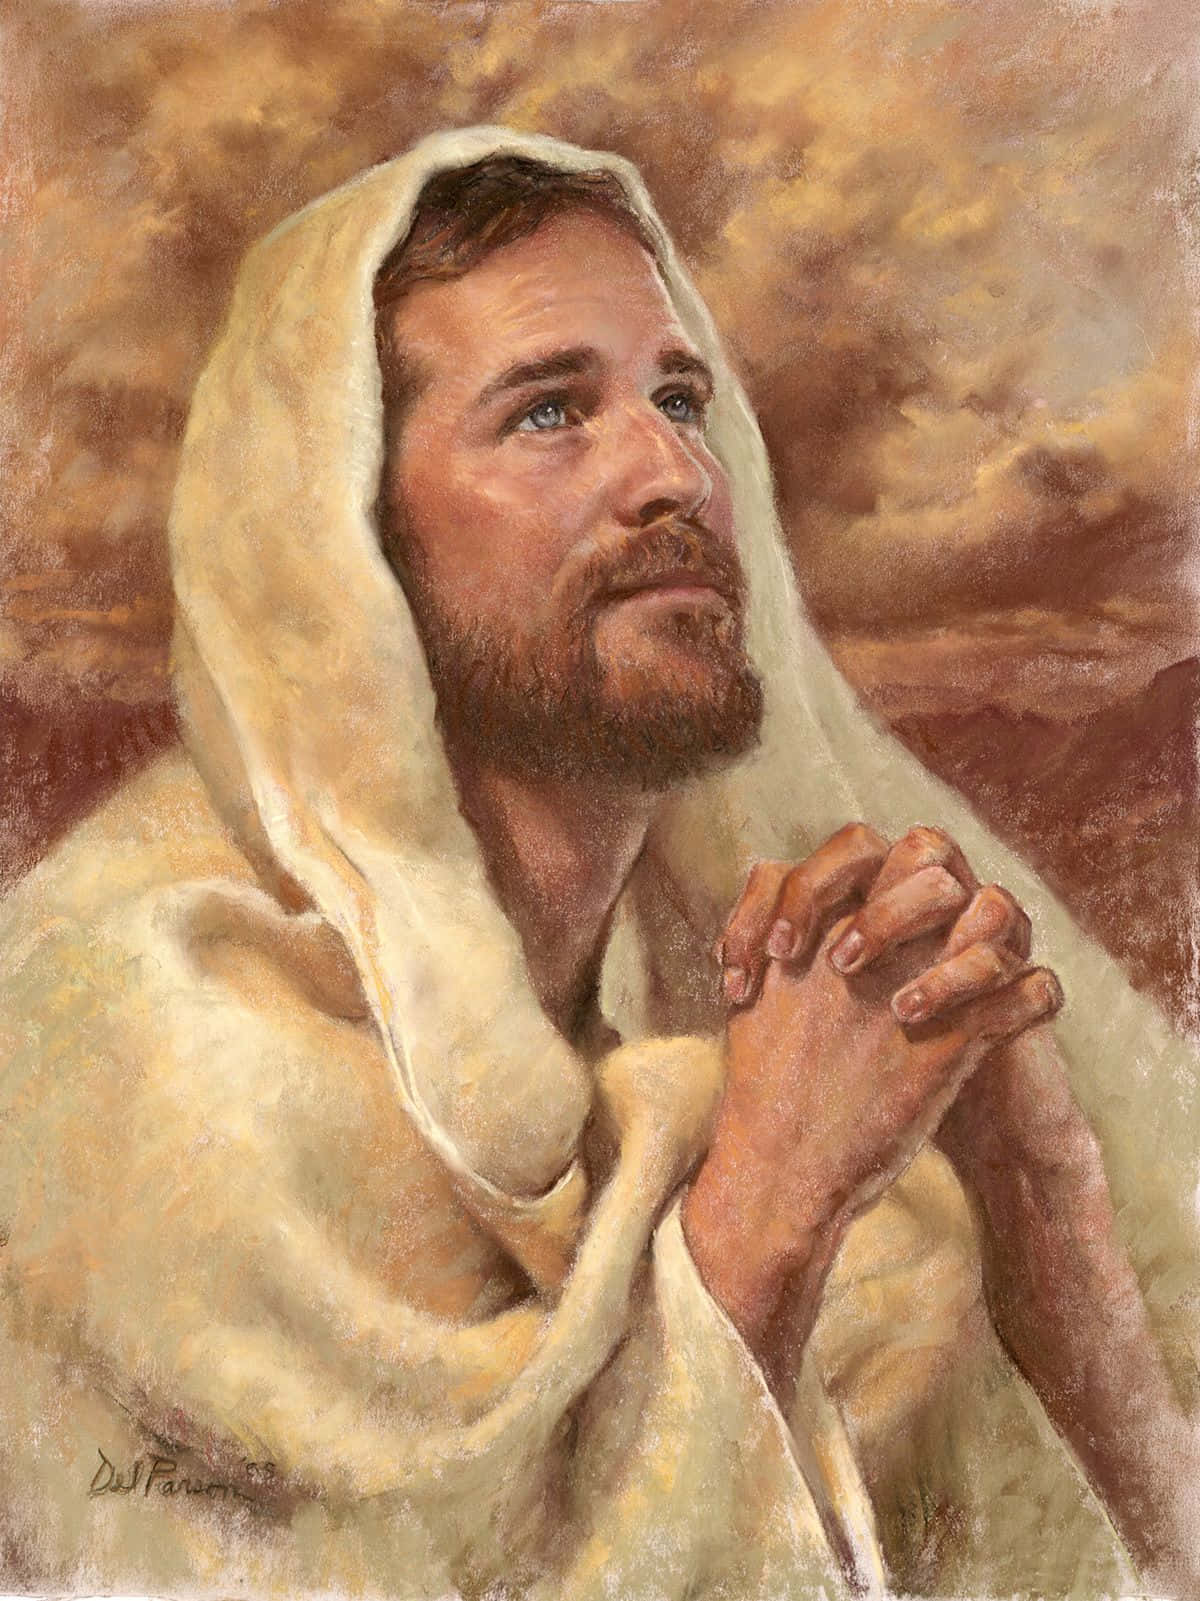 Jesus Christ, surrounded by light and glory Wallpaper